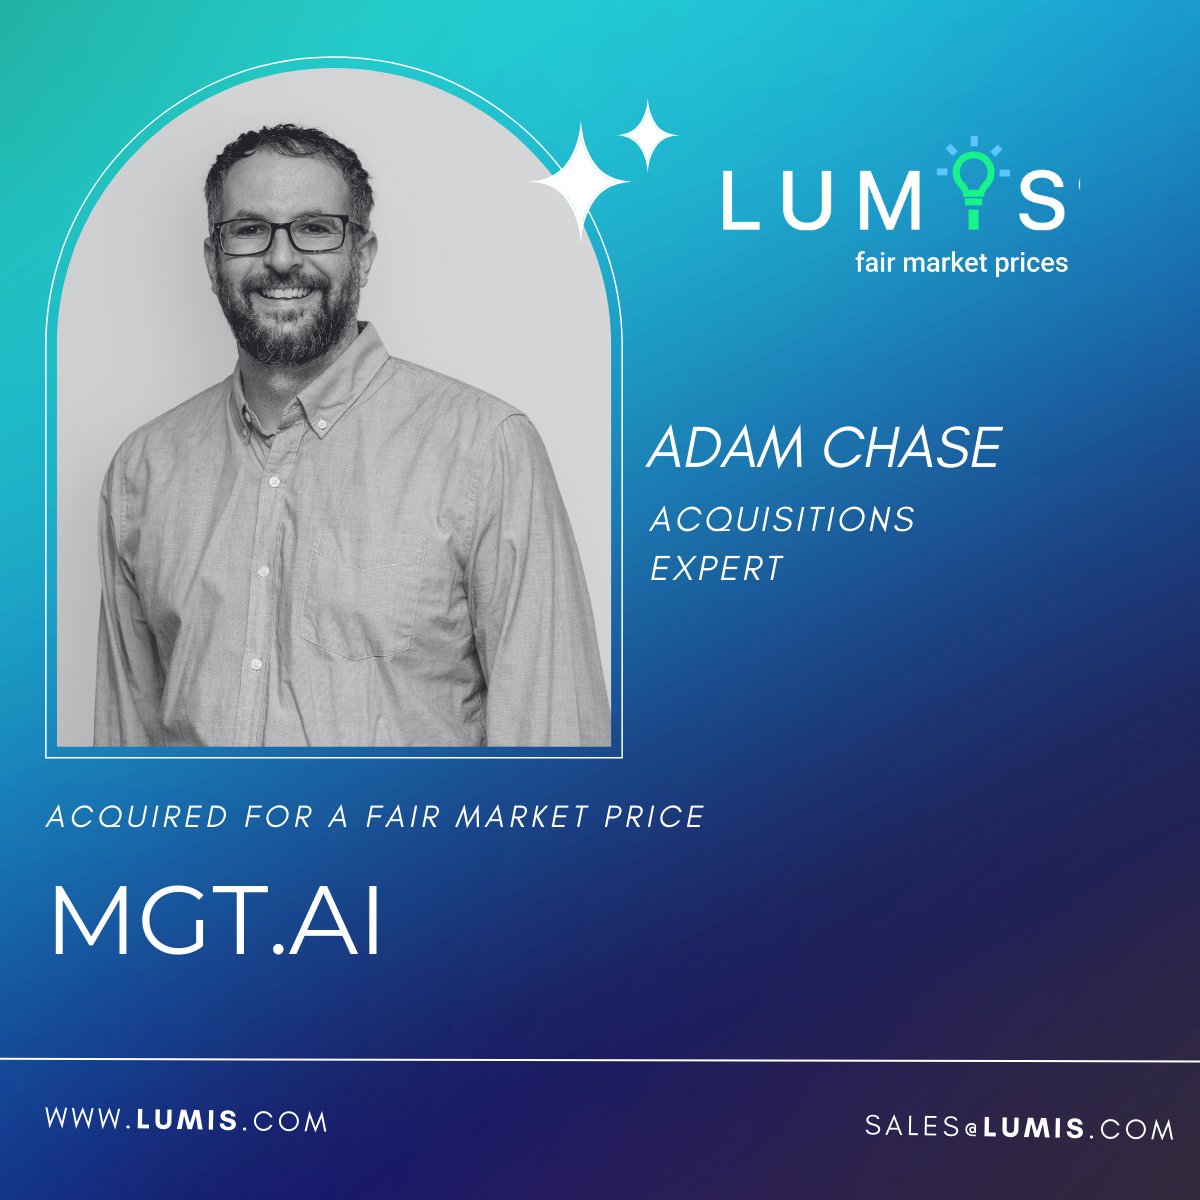 MGT.ai has been acquired. #Lumis